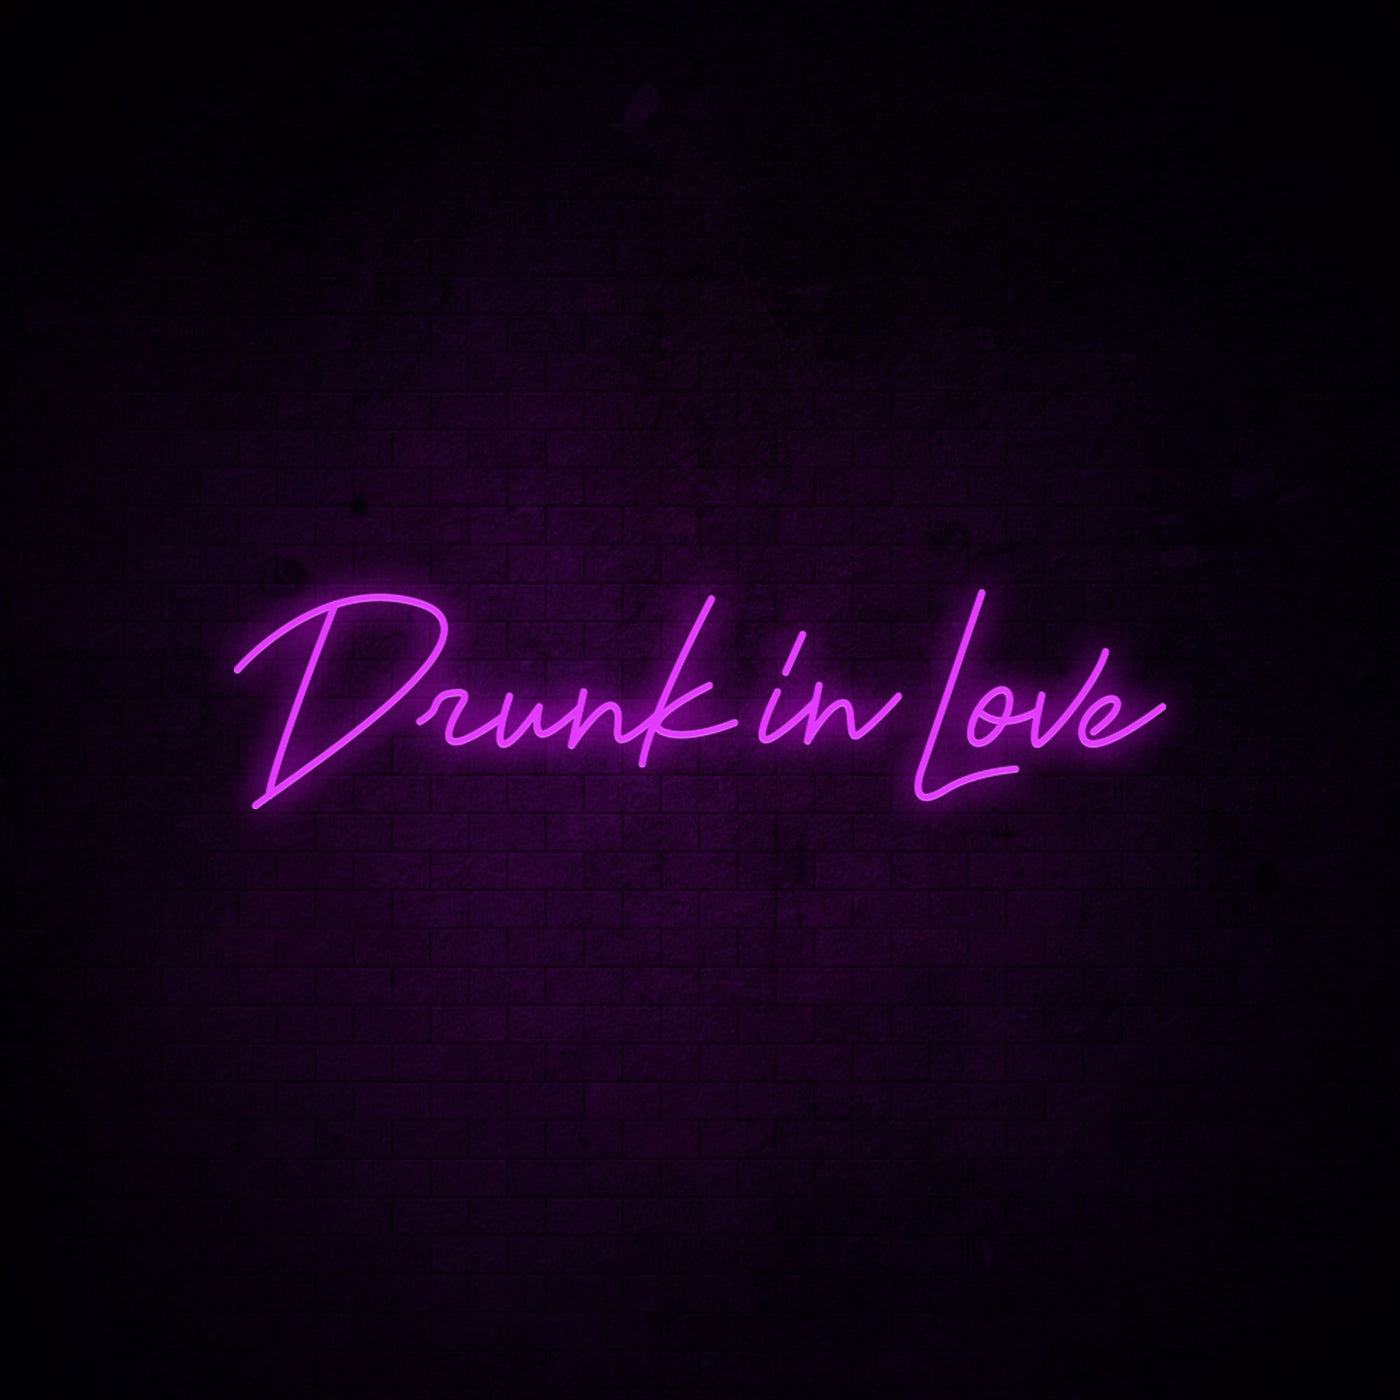 Drunk In Love Wall Neon Signs Wall Light for Home Decor or Bar Wall Neon Light Sign Provides Light for Parties, Living Spaces, or Restaurants